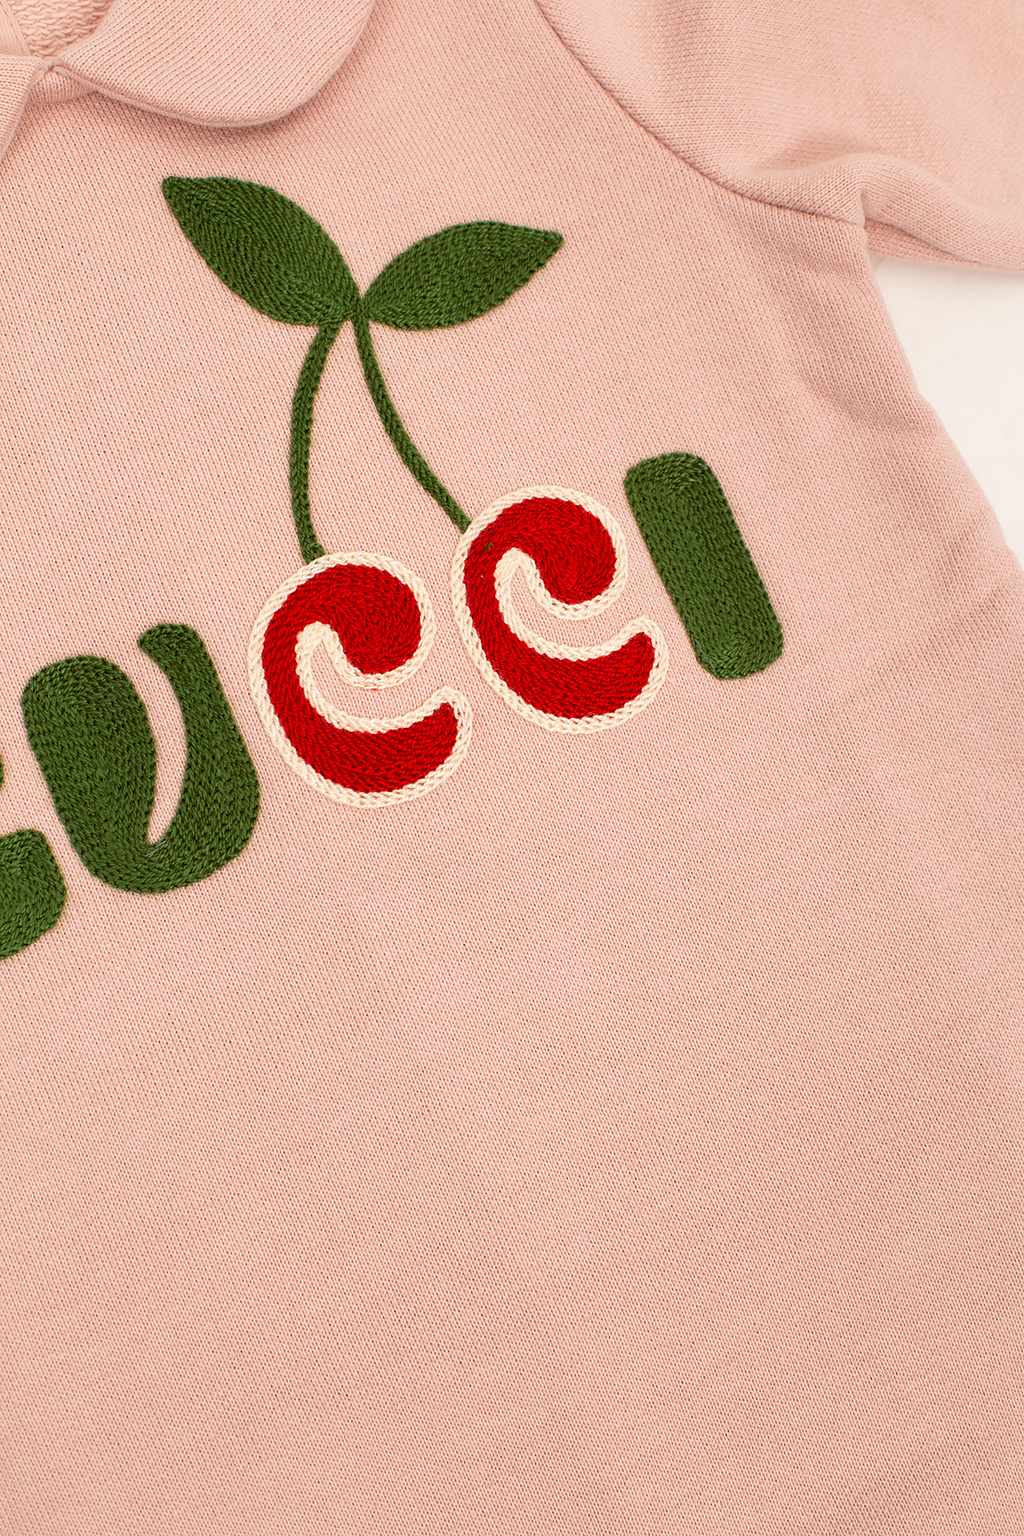 Gucci Kids Dress with logo, Kids's Baby (0-36 months)